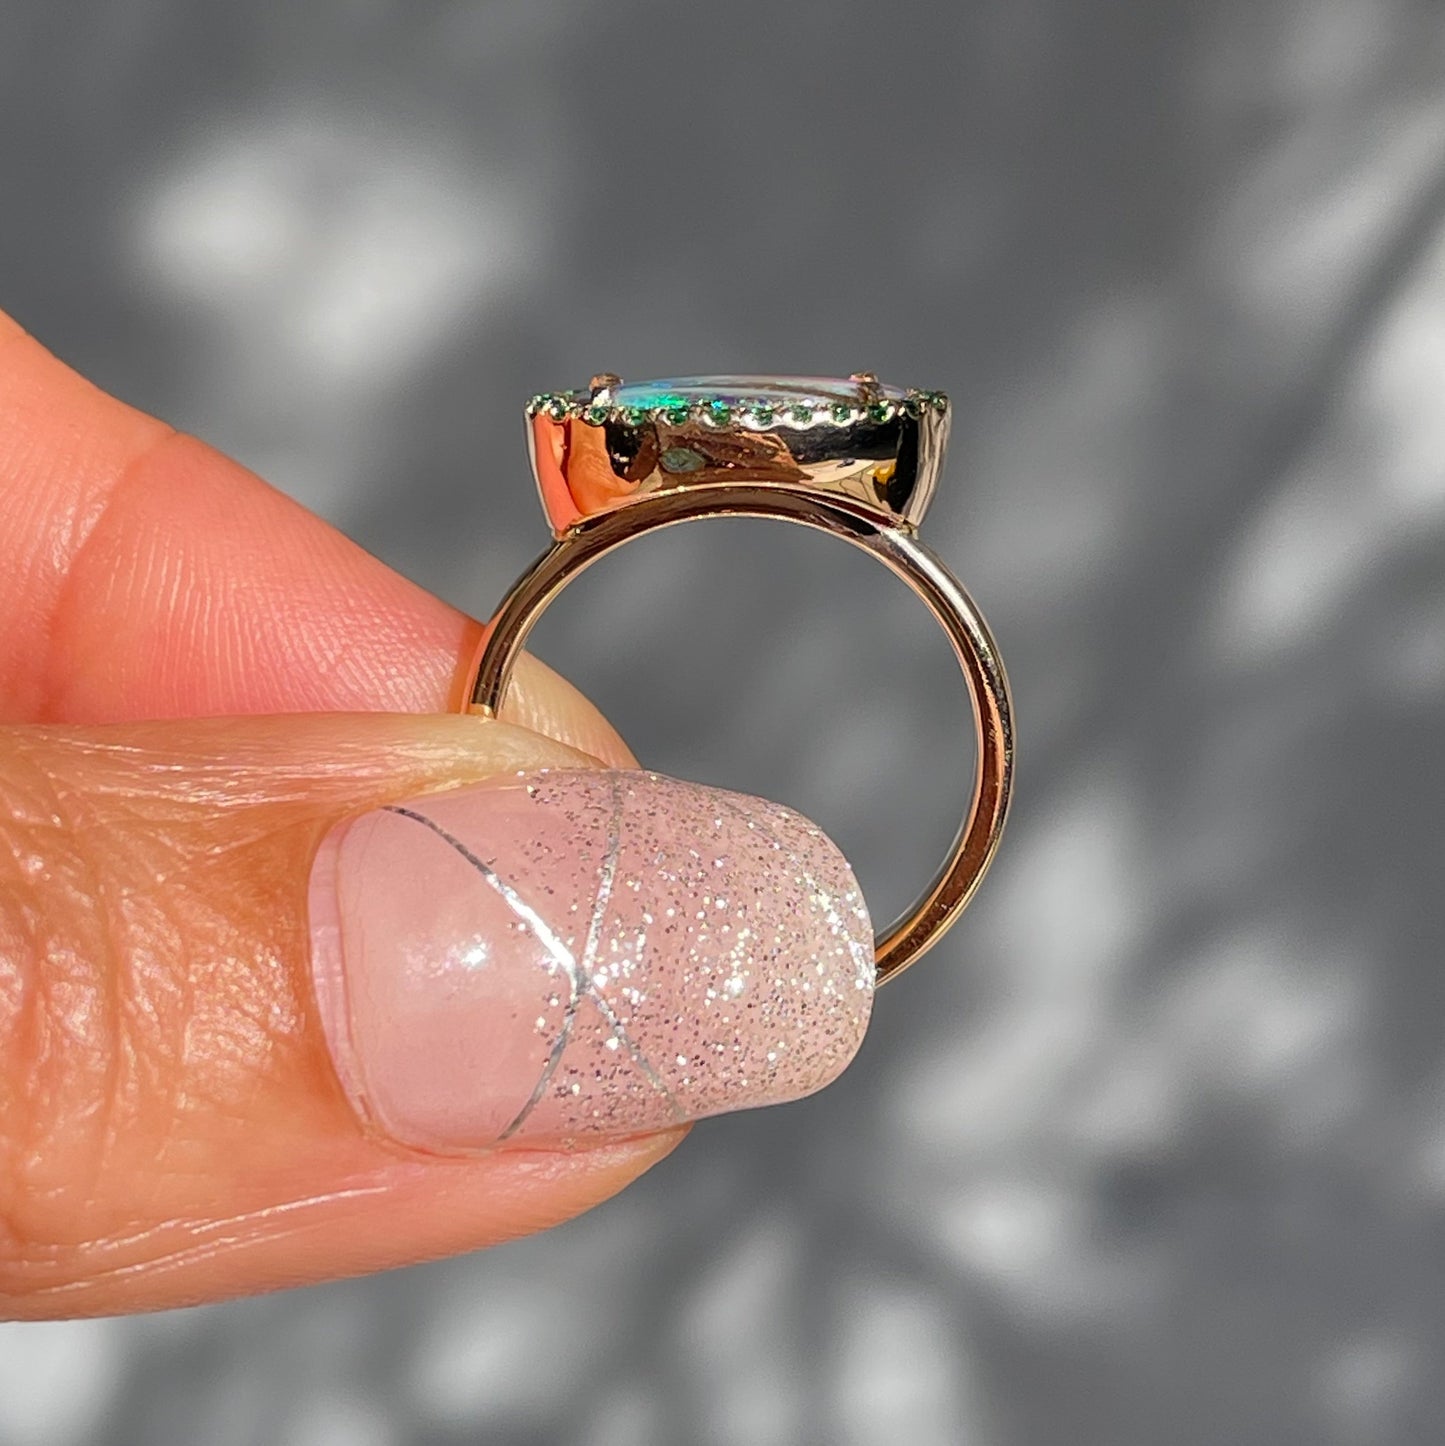 Australian Opal and Emerald Ring by NIXIN Jewelry held showing profile. Rose gold emerald opal ring.